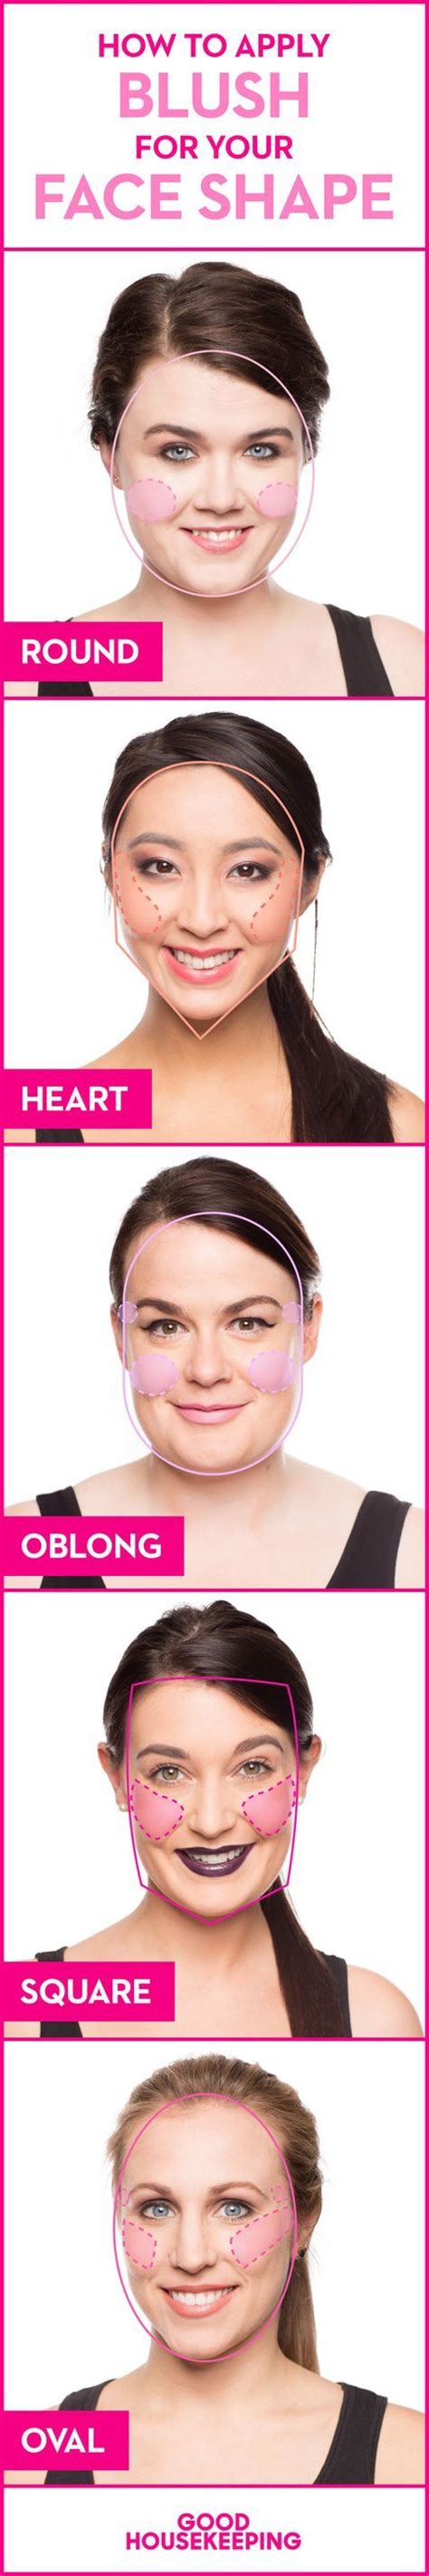 the best way to apply blush according to your face shape in 2020 how